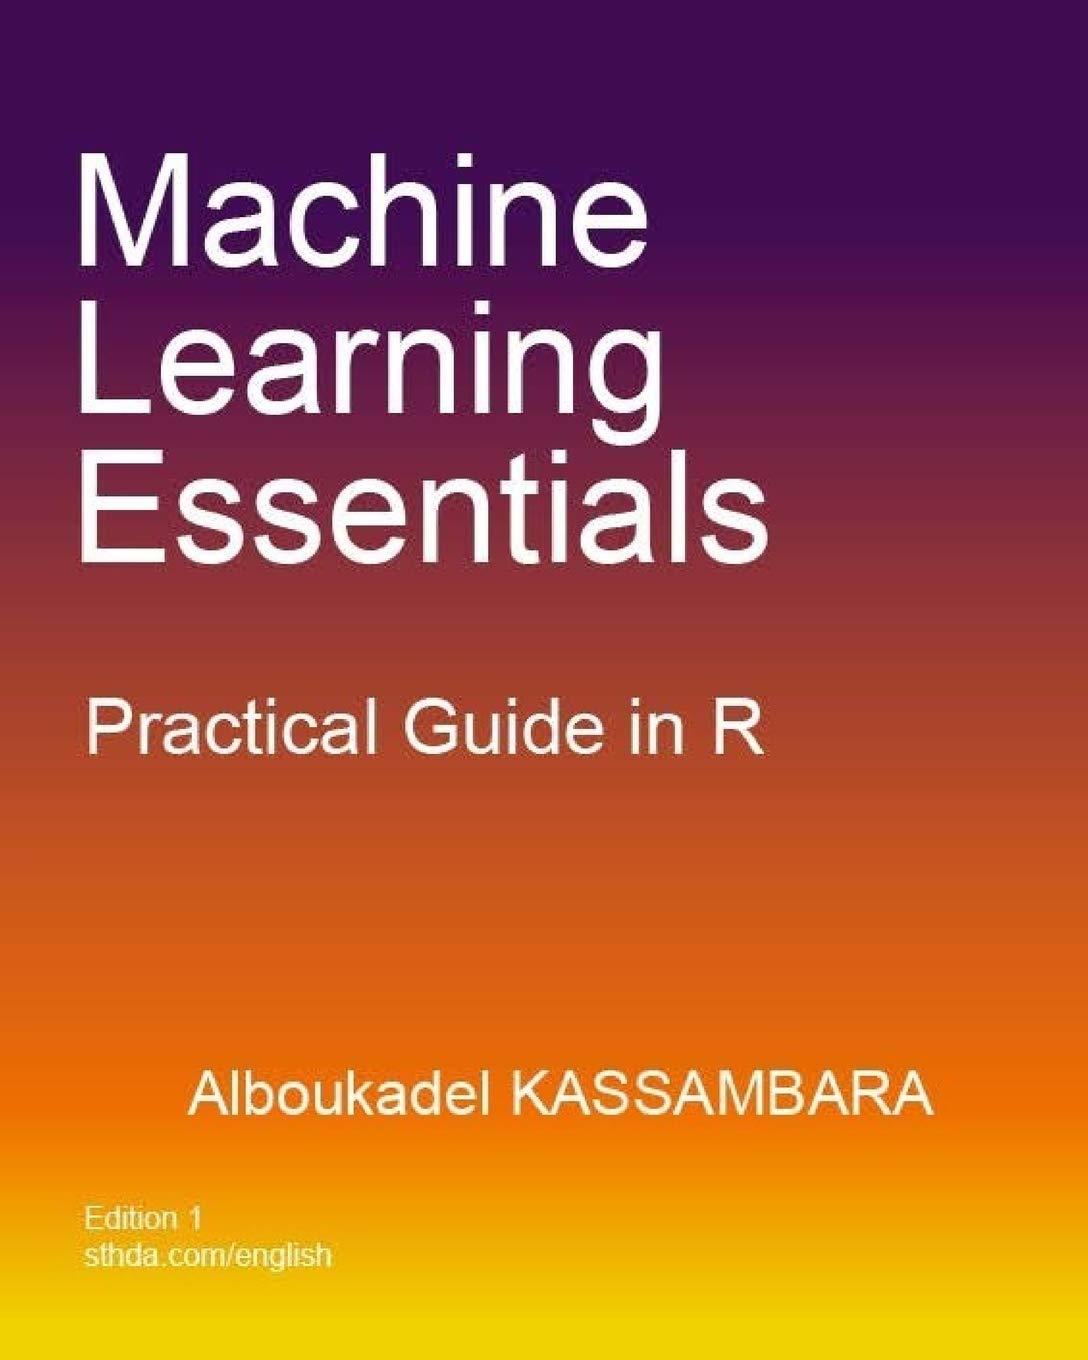 machine learning essentials practical guide in r 1st edition alboukadel kassambara 978-1986406857